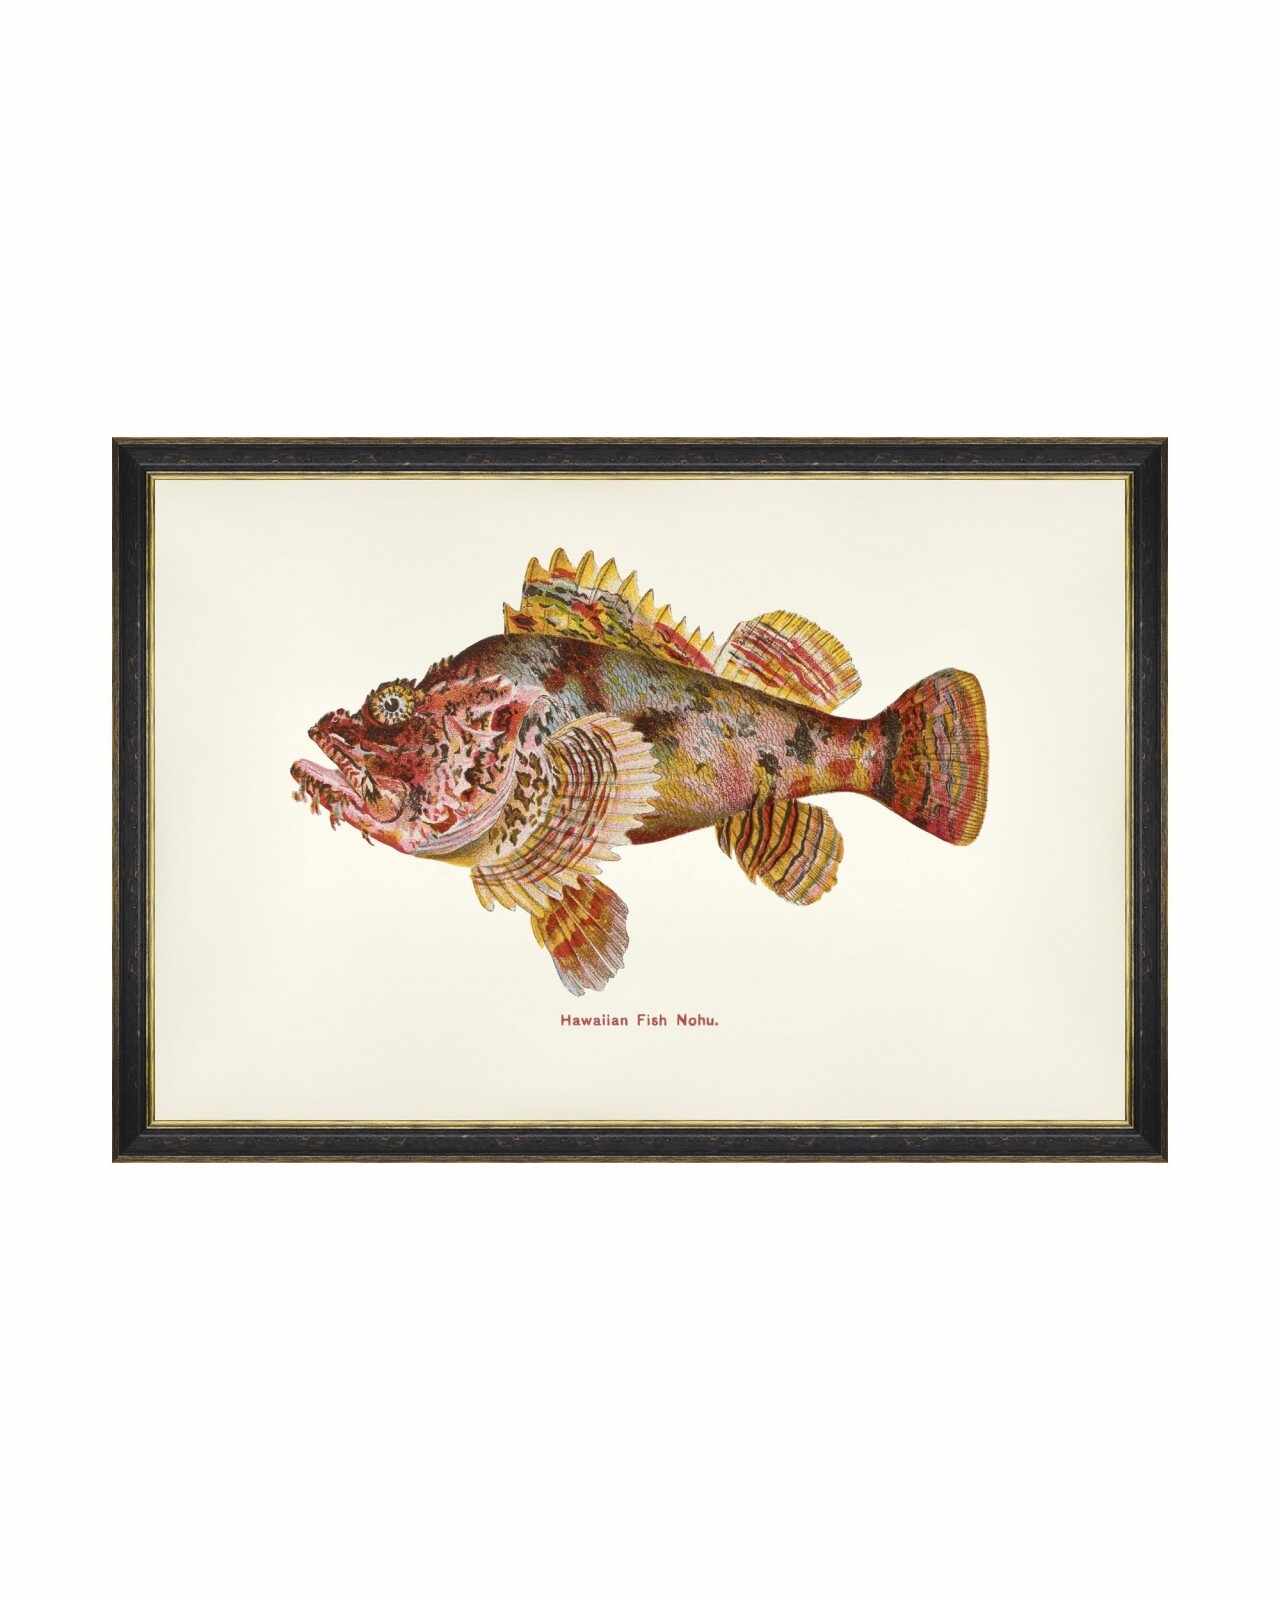 Tablou Framed Art Fishes Of Hawaii - Nohu Fish, 60 x 40 cm